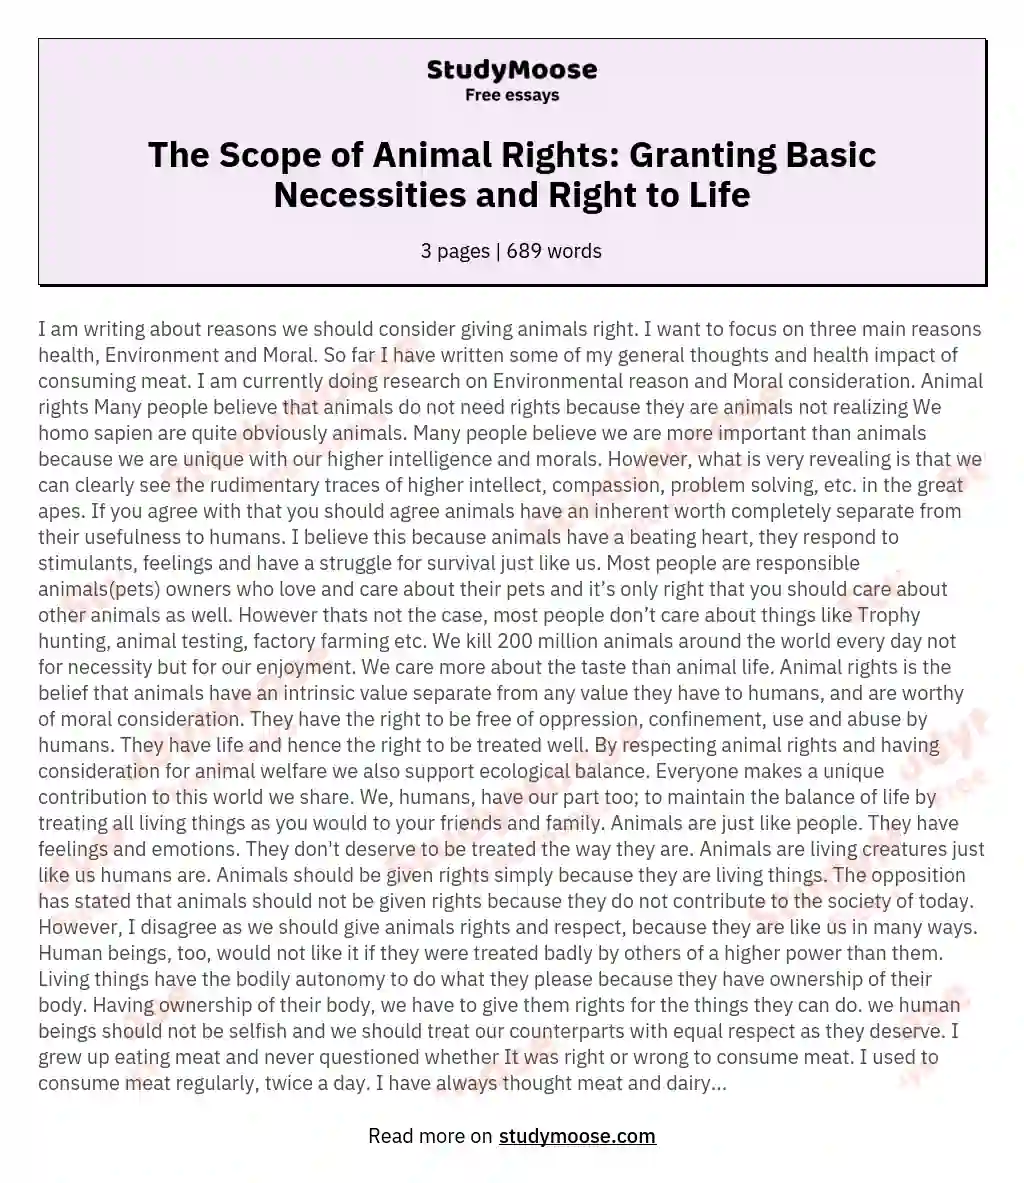 The Scope of Animal Rights: Granting Basic Necessities and Right to Life essay